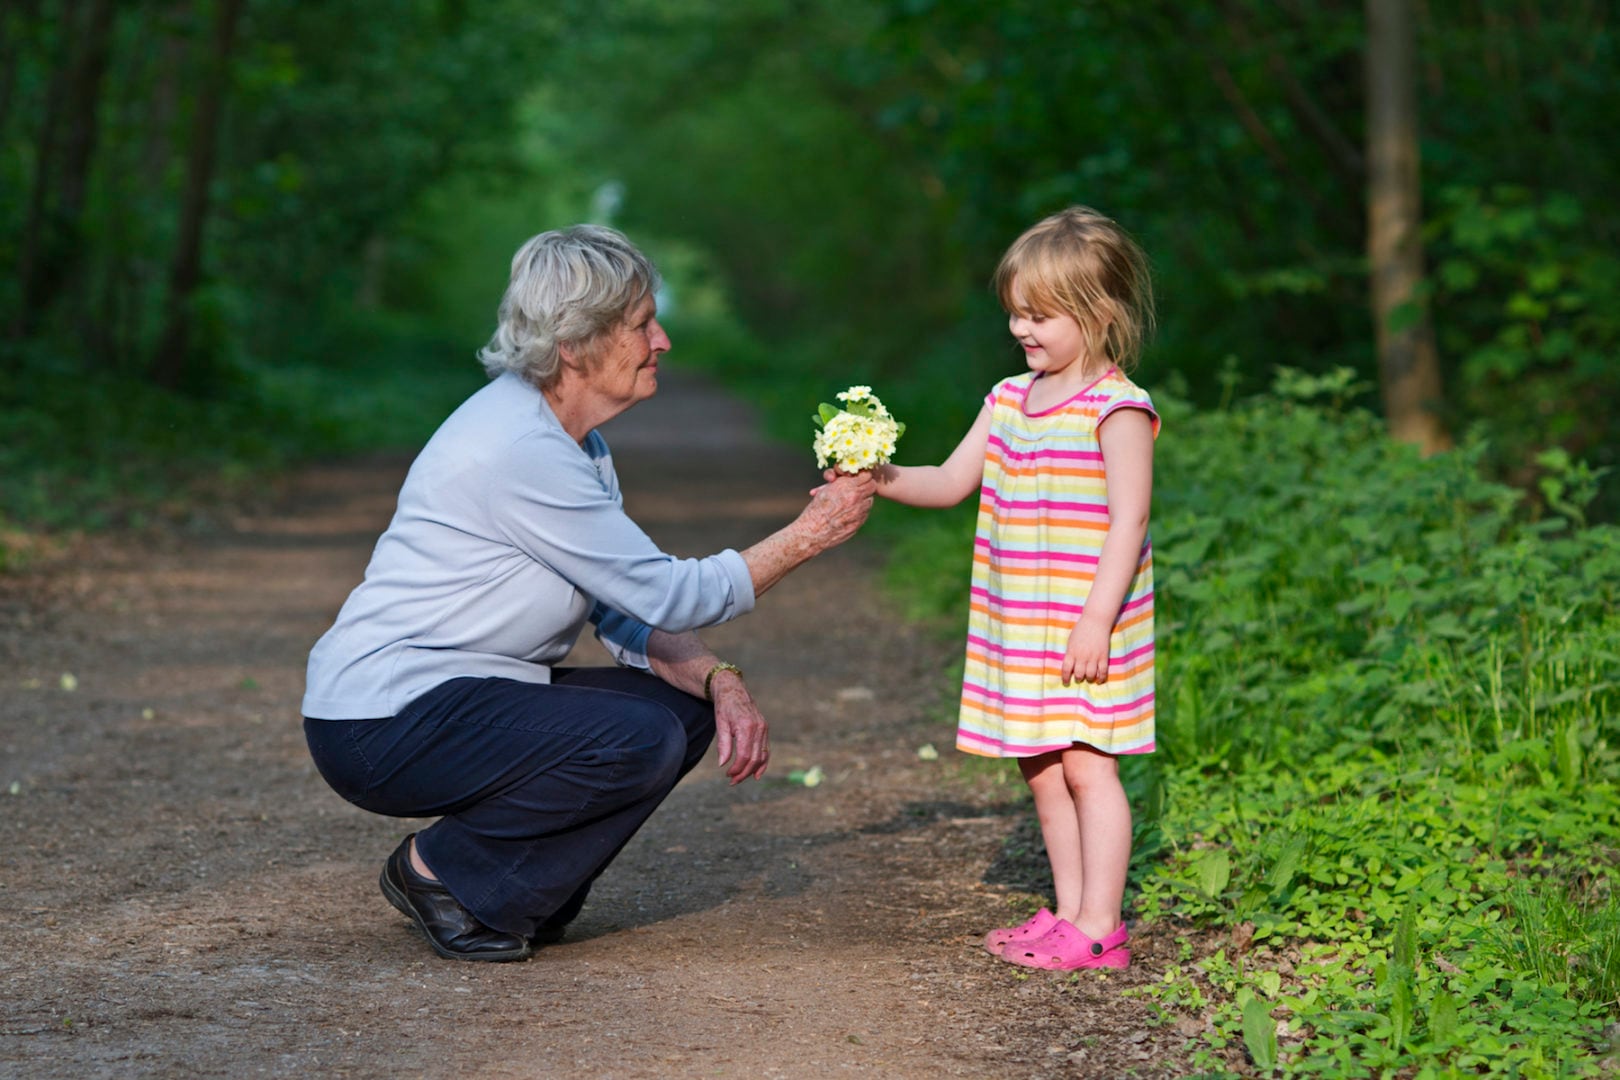 101 random acts of kindness ideas to do with your family